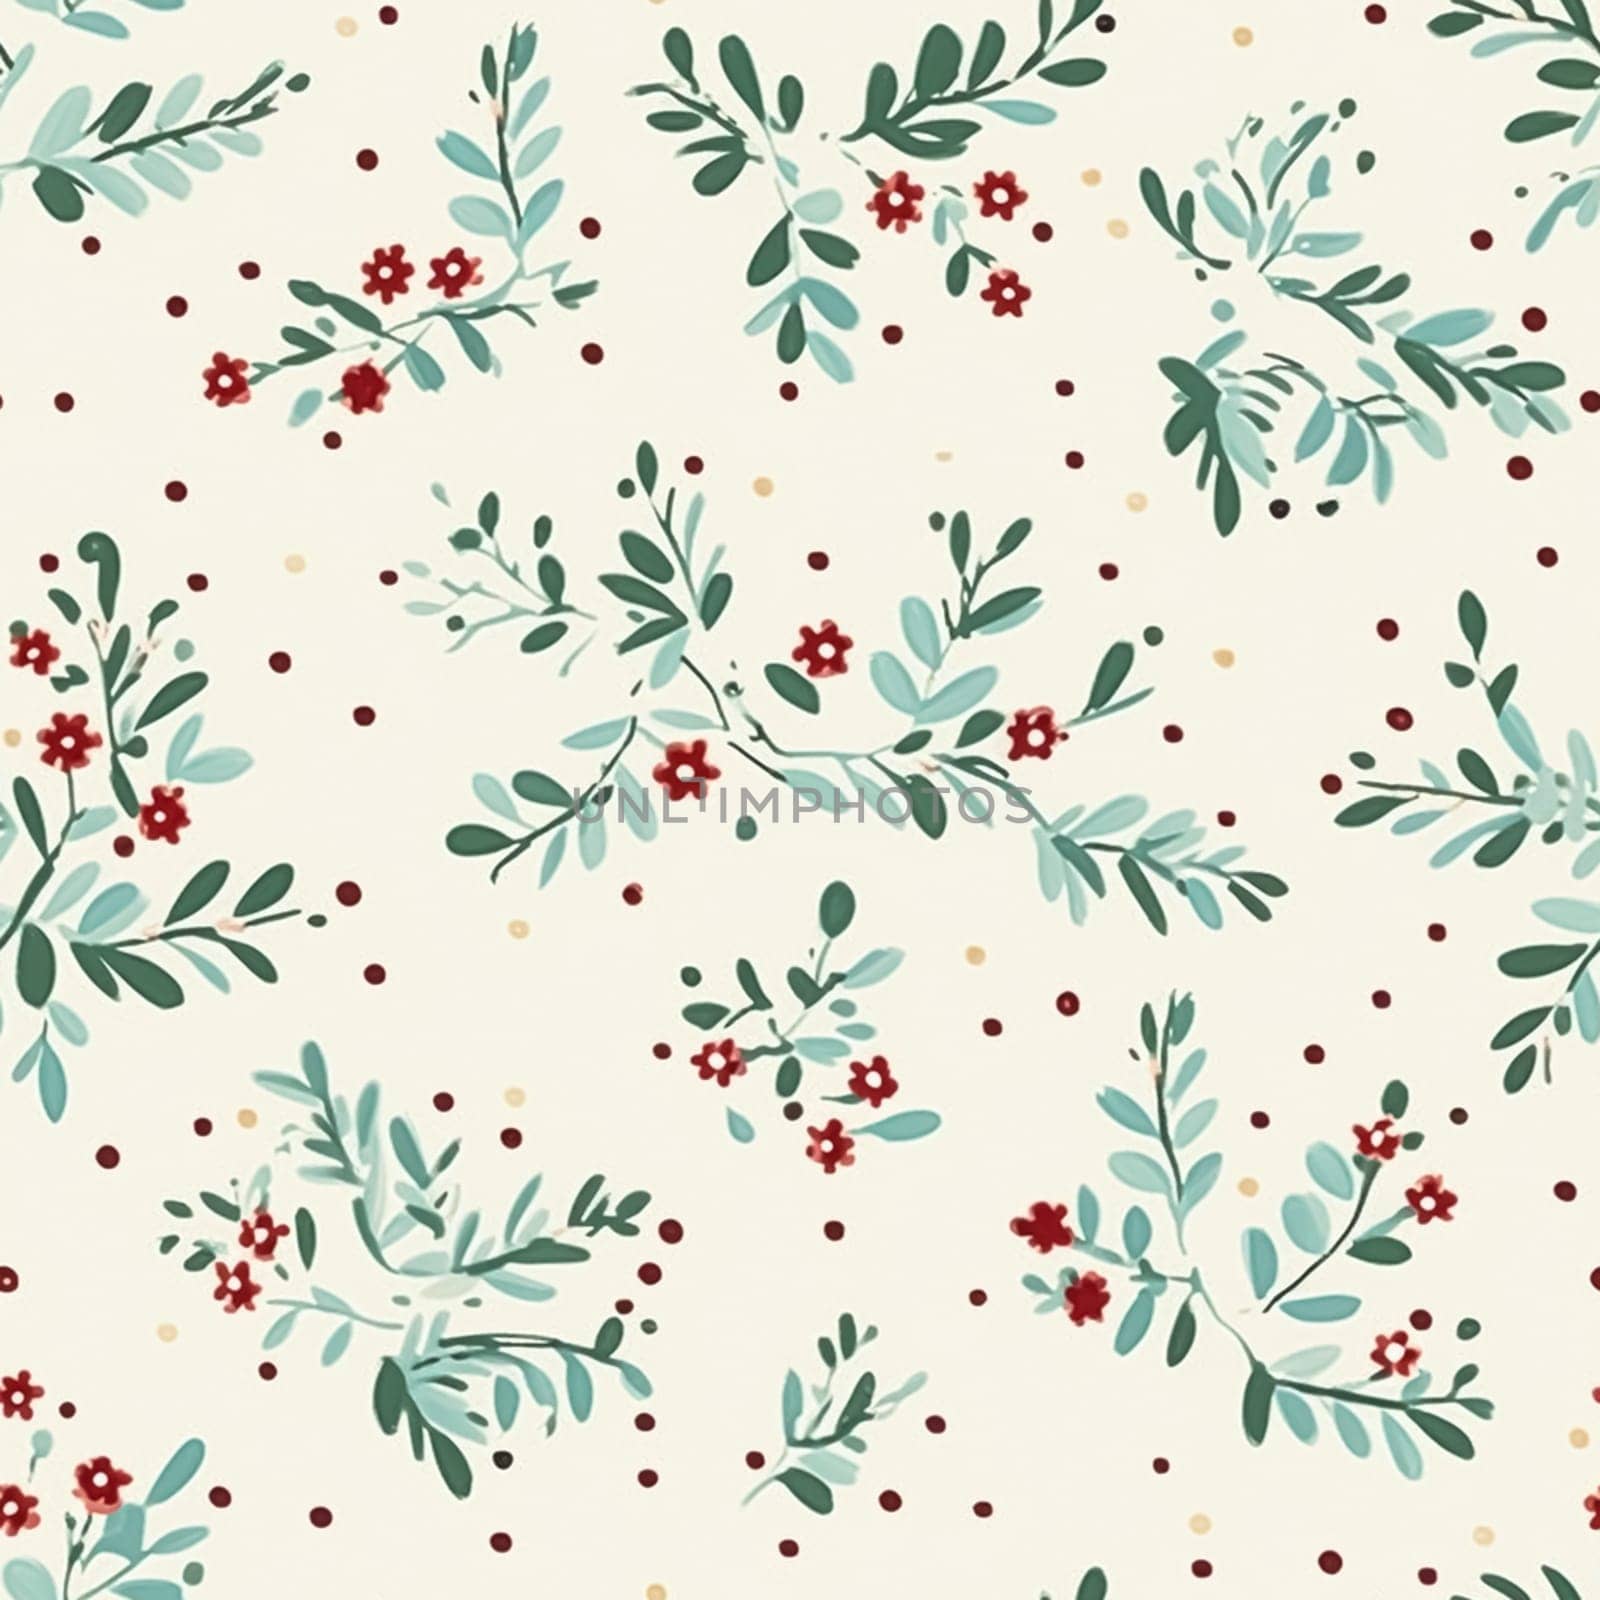 Seamless holiday pattern, tileable botanical English holly, winterberry Christmas branch country print for wallpaper, wrapping paper, scrapbook, fabric and product design by Anneleven